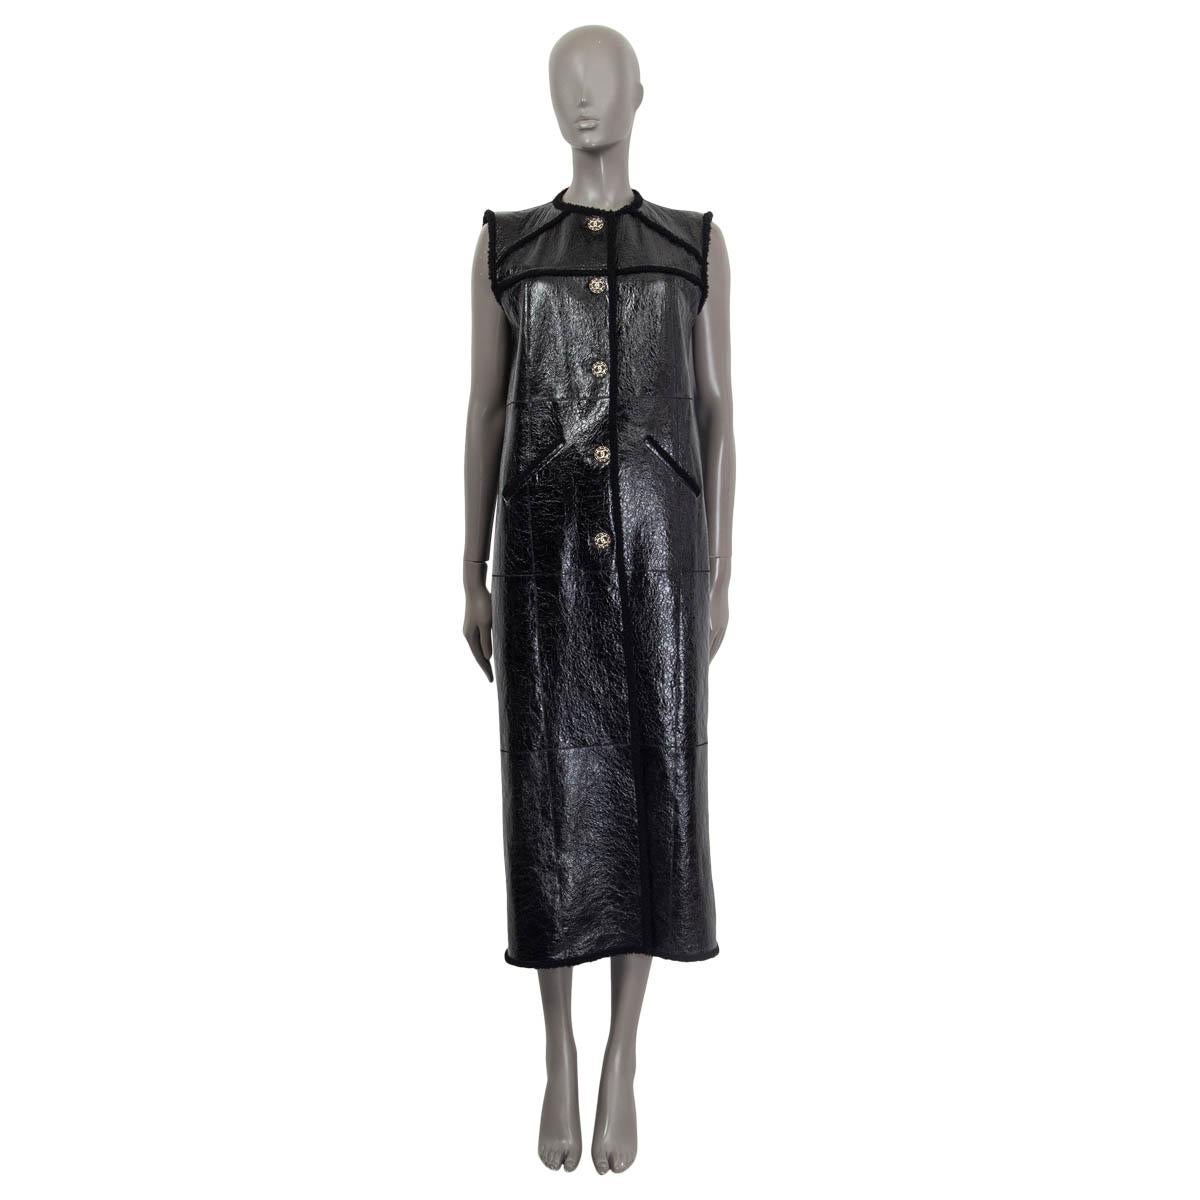 100% authentic Chanel Fall/Winter 2018 sleeveless cracket coat in black dyed lamb leather and shearling (100%). Features a shearling trim and two slit pockets on the front. Opens with five 'CC' buttons on the front. Has been worn once and is in